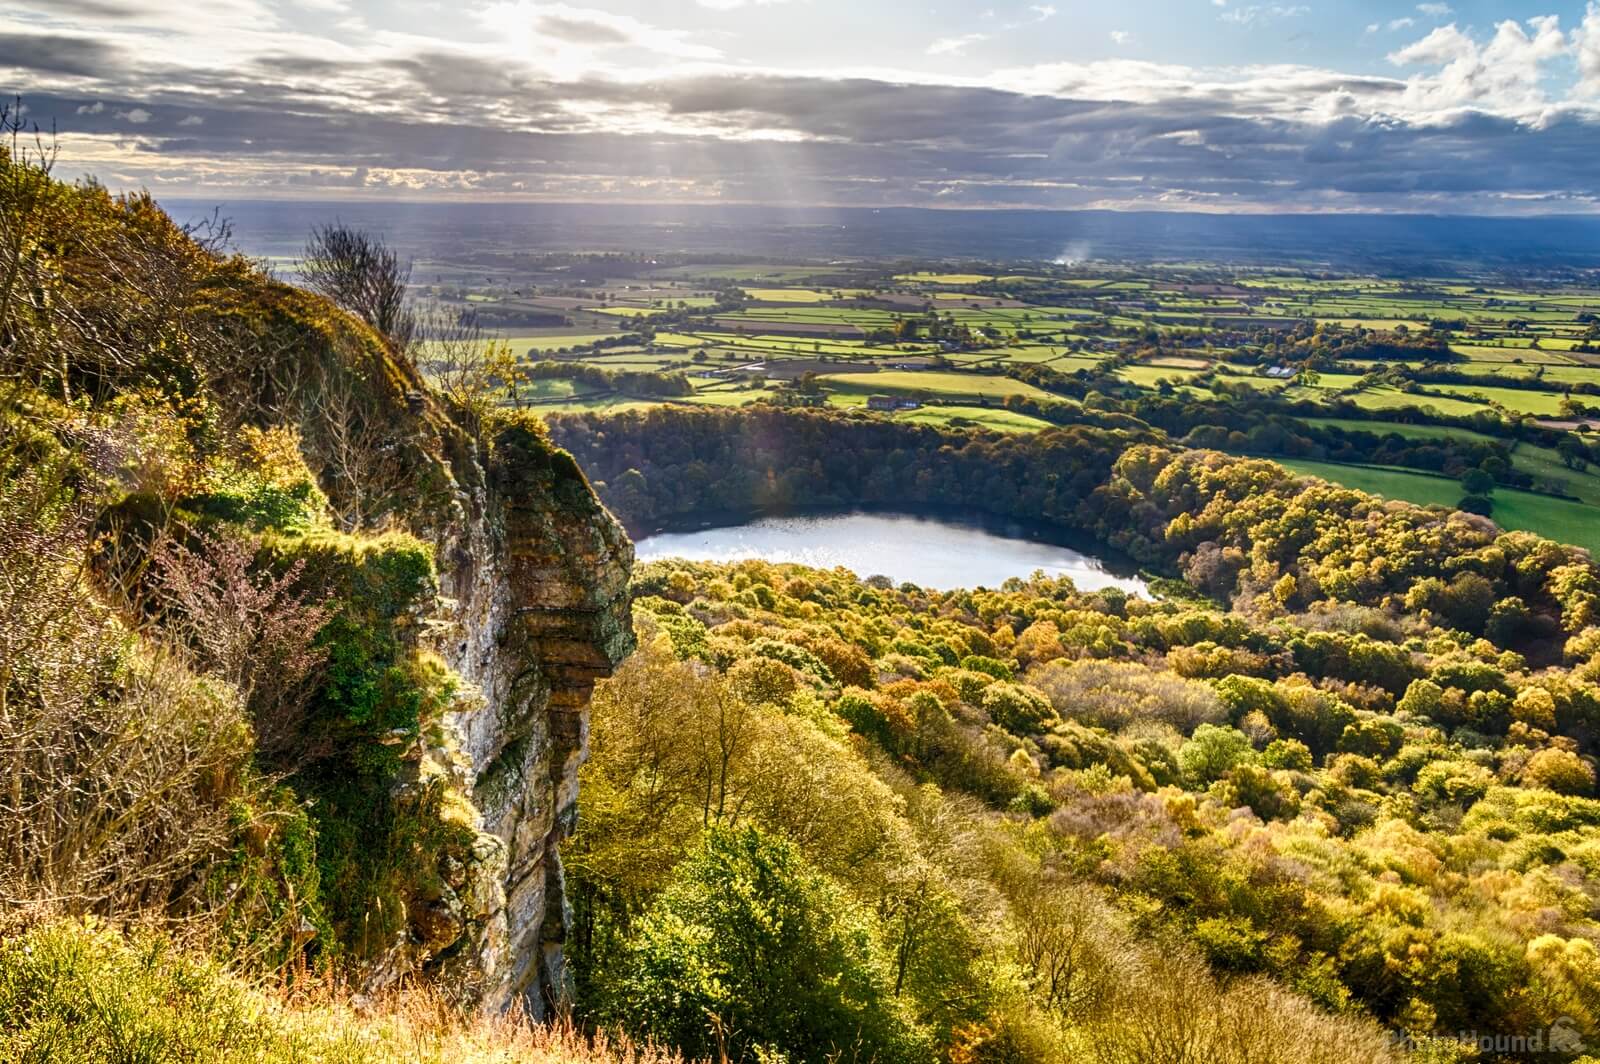 Image of Sutton Bank by Andy Killingbeck